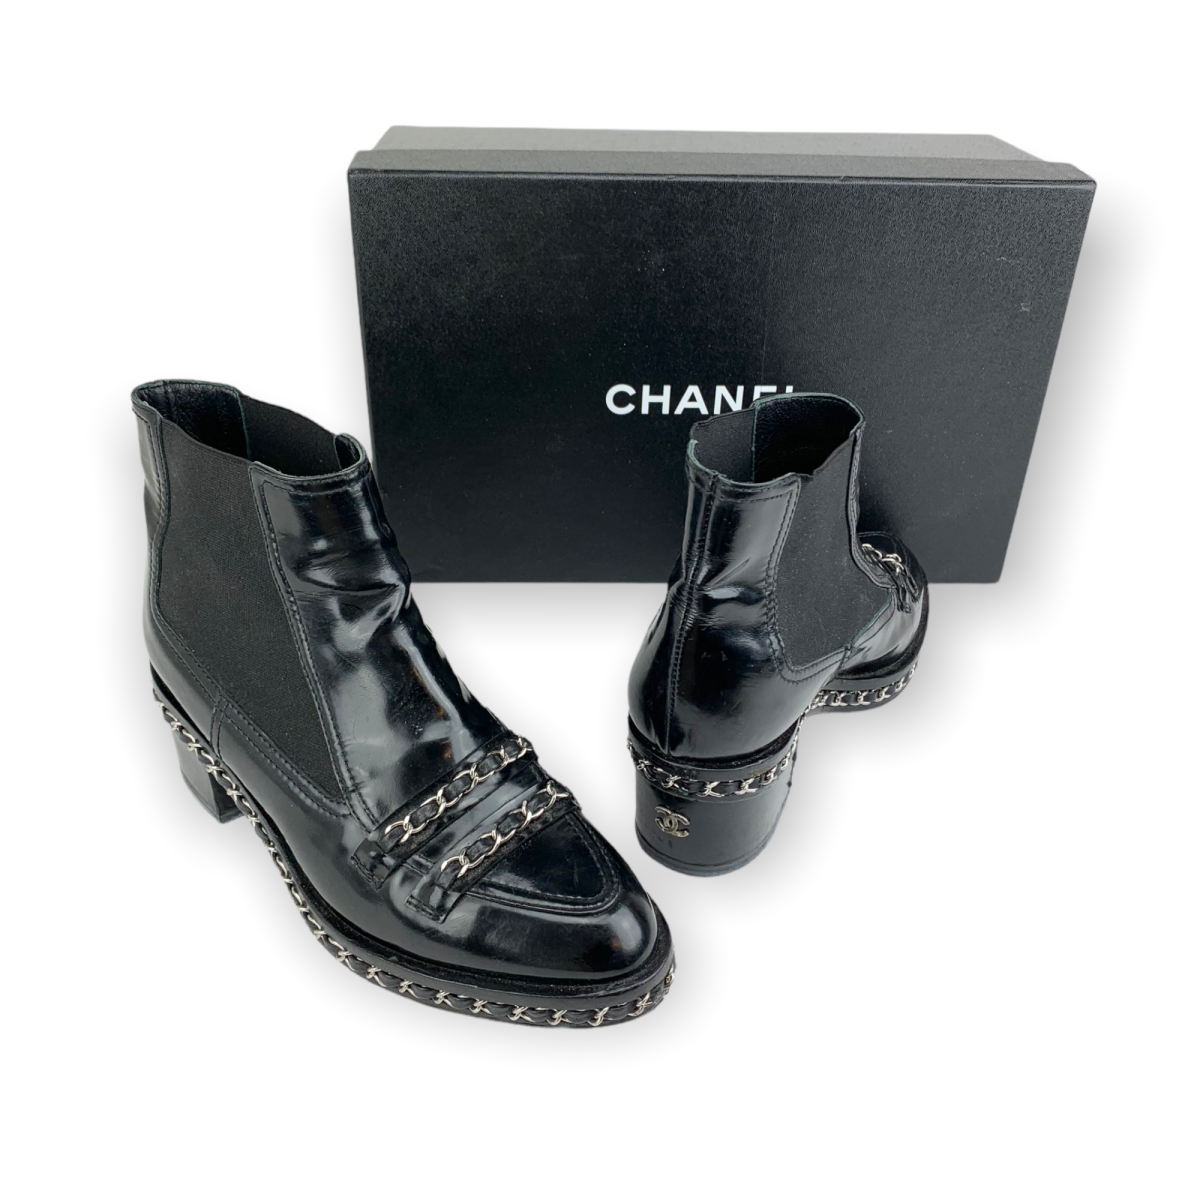 CHANEL BOOTS - CHANEL NYMANN BRAND APS